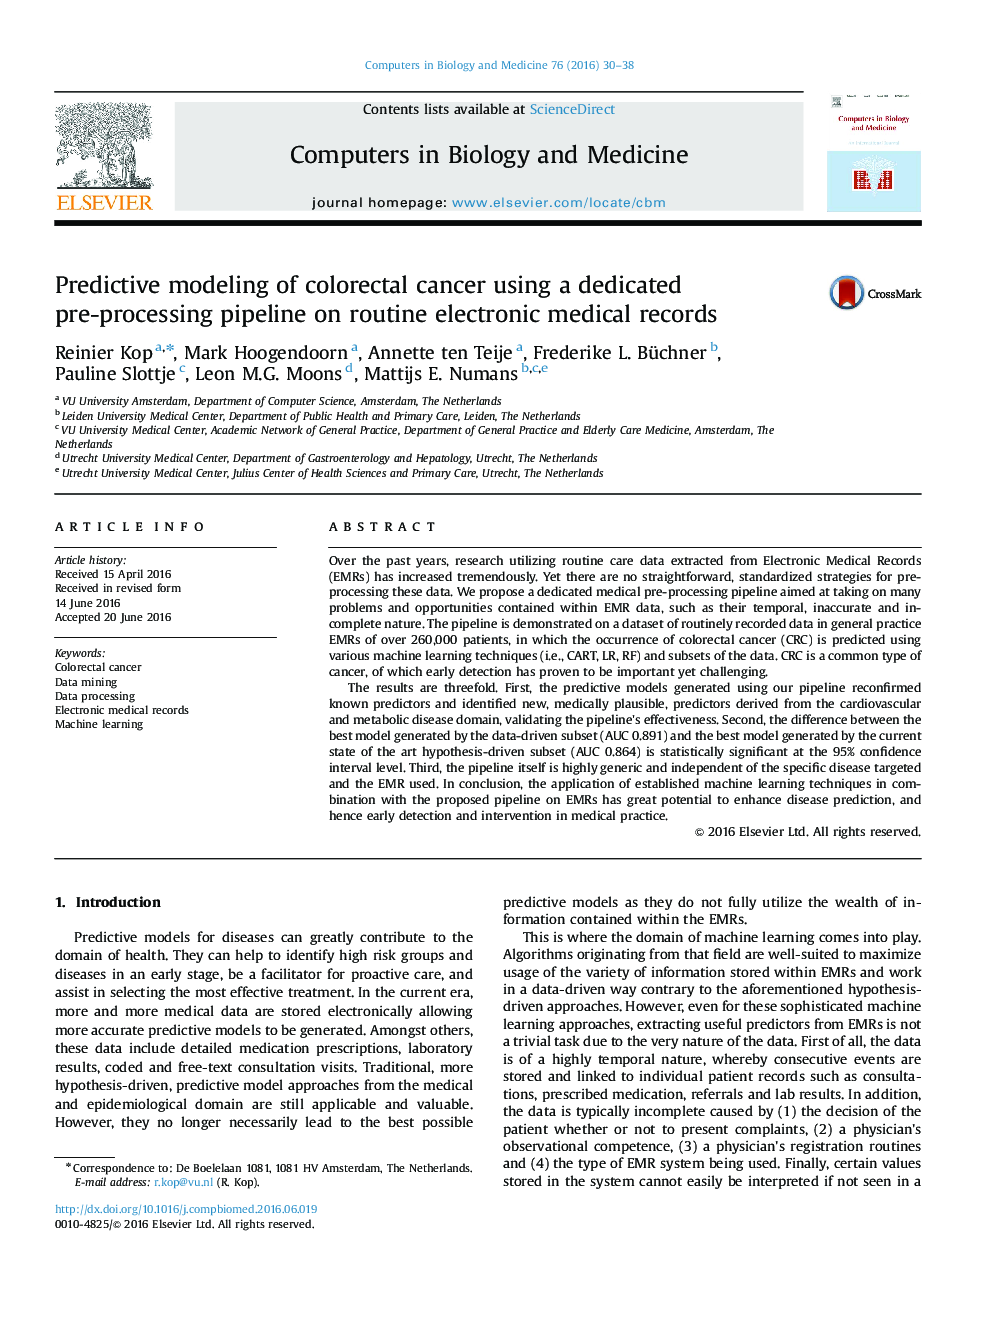 Predictive modeling of colorectal cancer using a dedicated pre-processing pipeline on routine electronic medical records